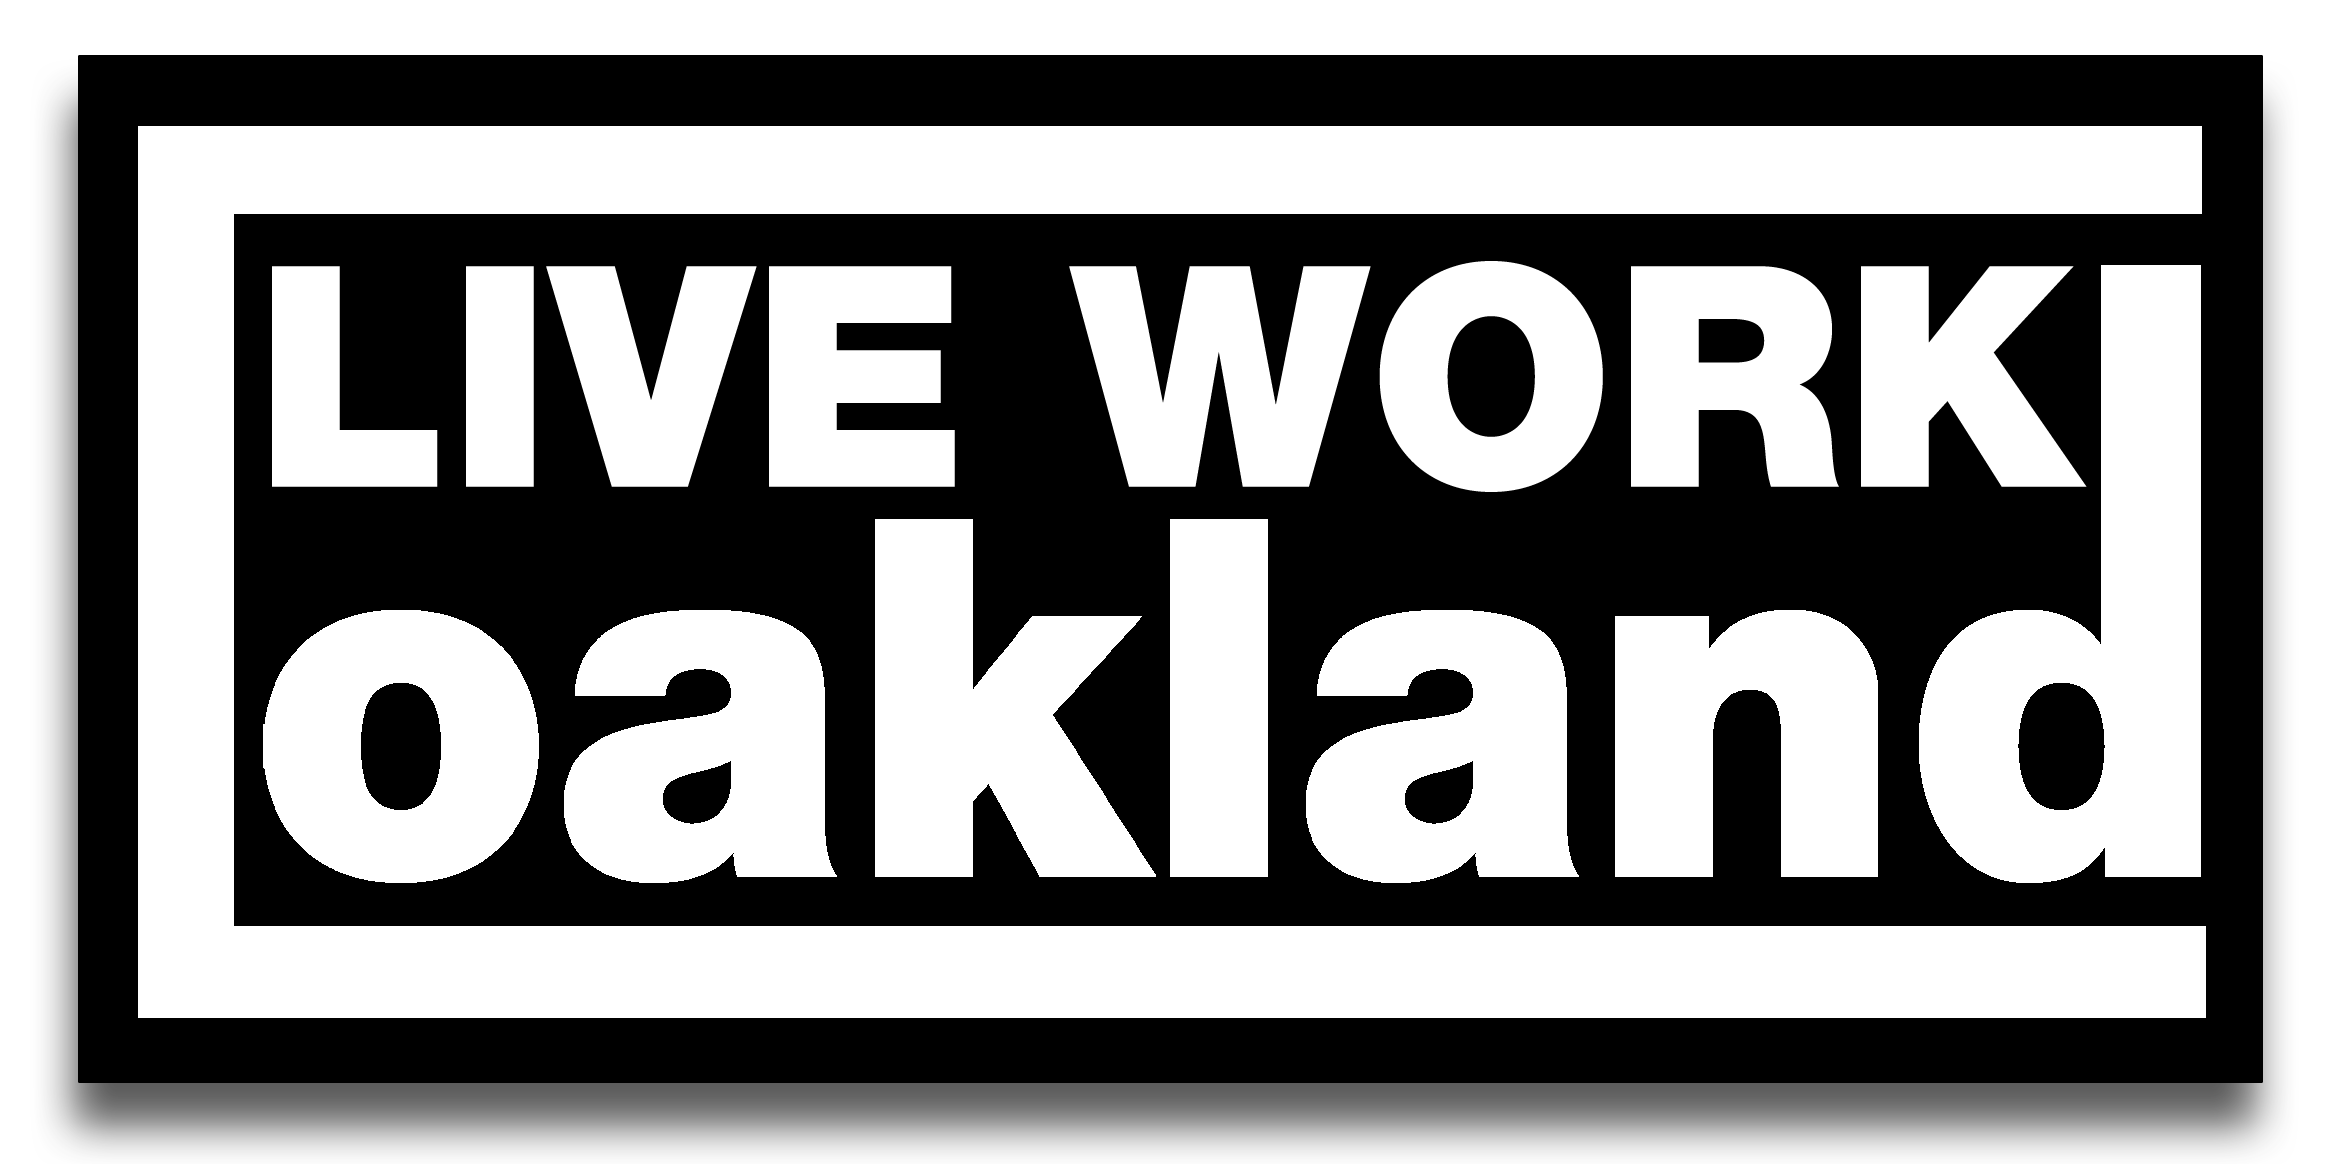 OAKLANDISH CEO ANGELA TSAY SEES COMMUNITY AS THE ROOTS OF GOOD BUSINESS